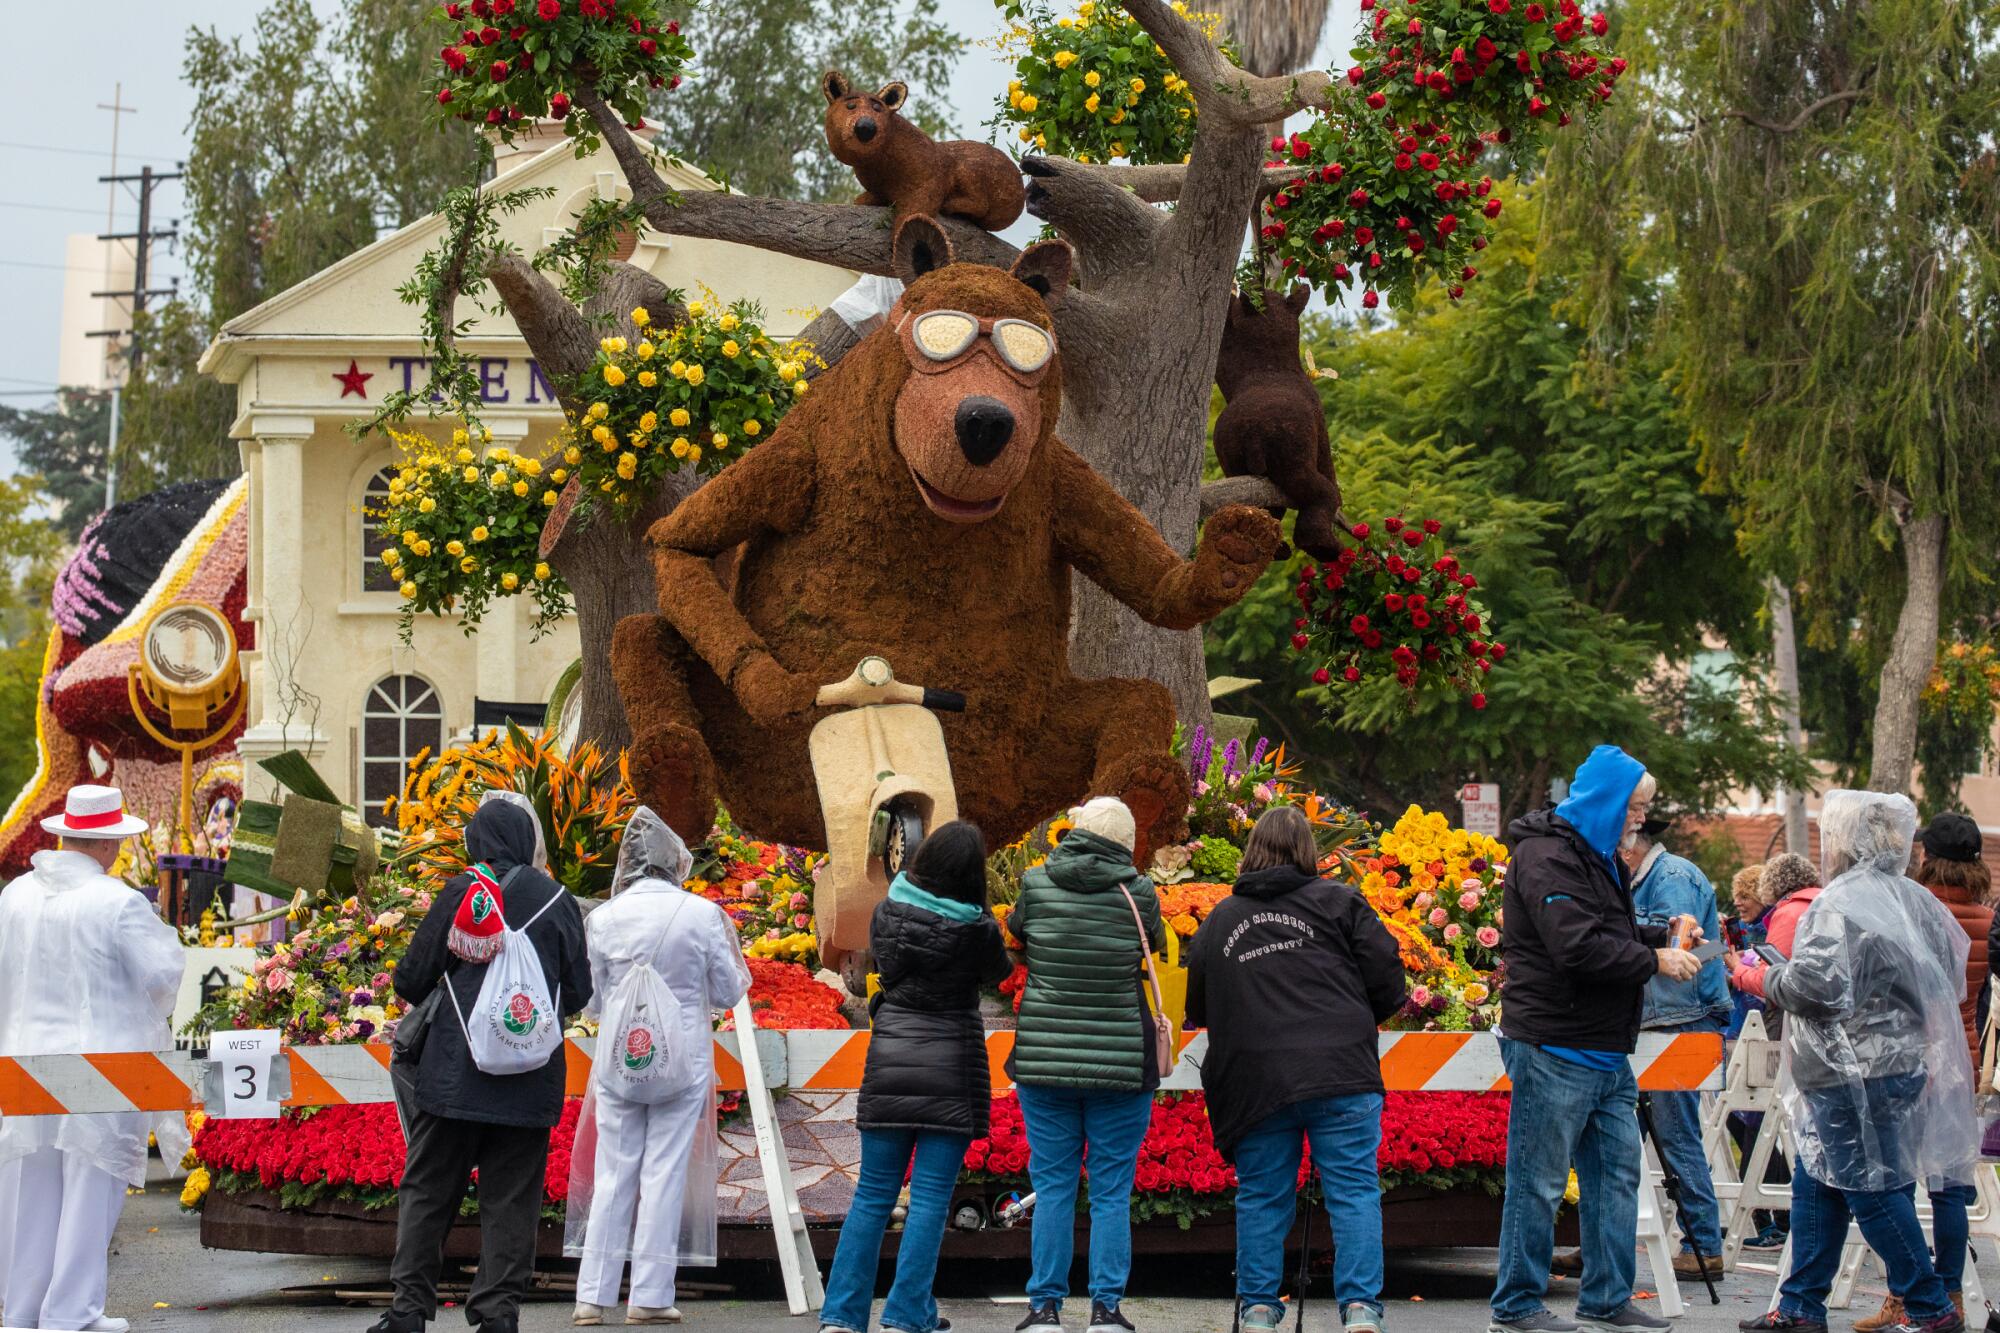 Visitors look at a float with a giant bear figure wearing sunglasses and riding a vespa 